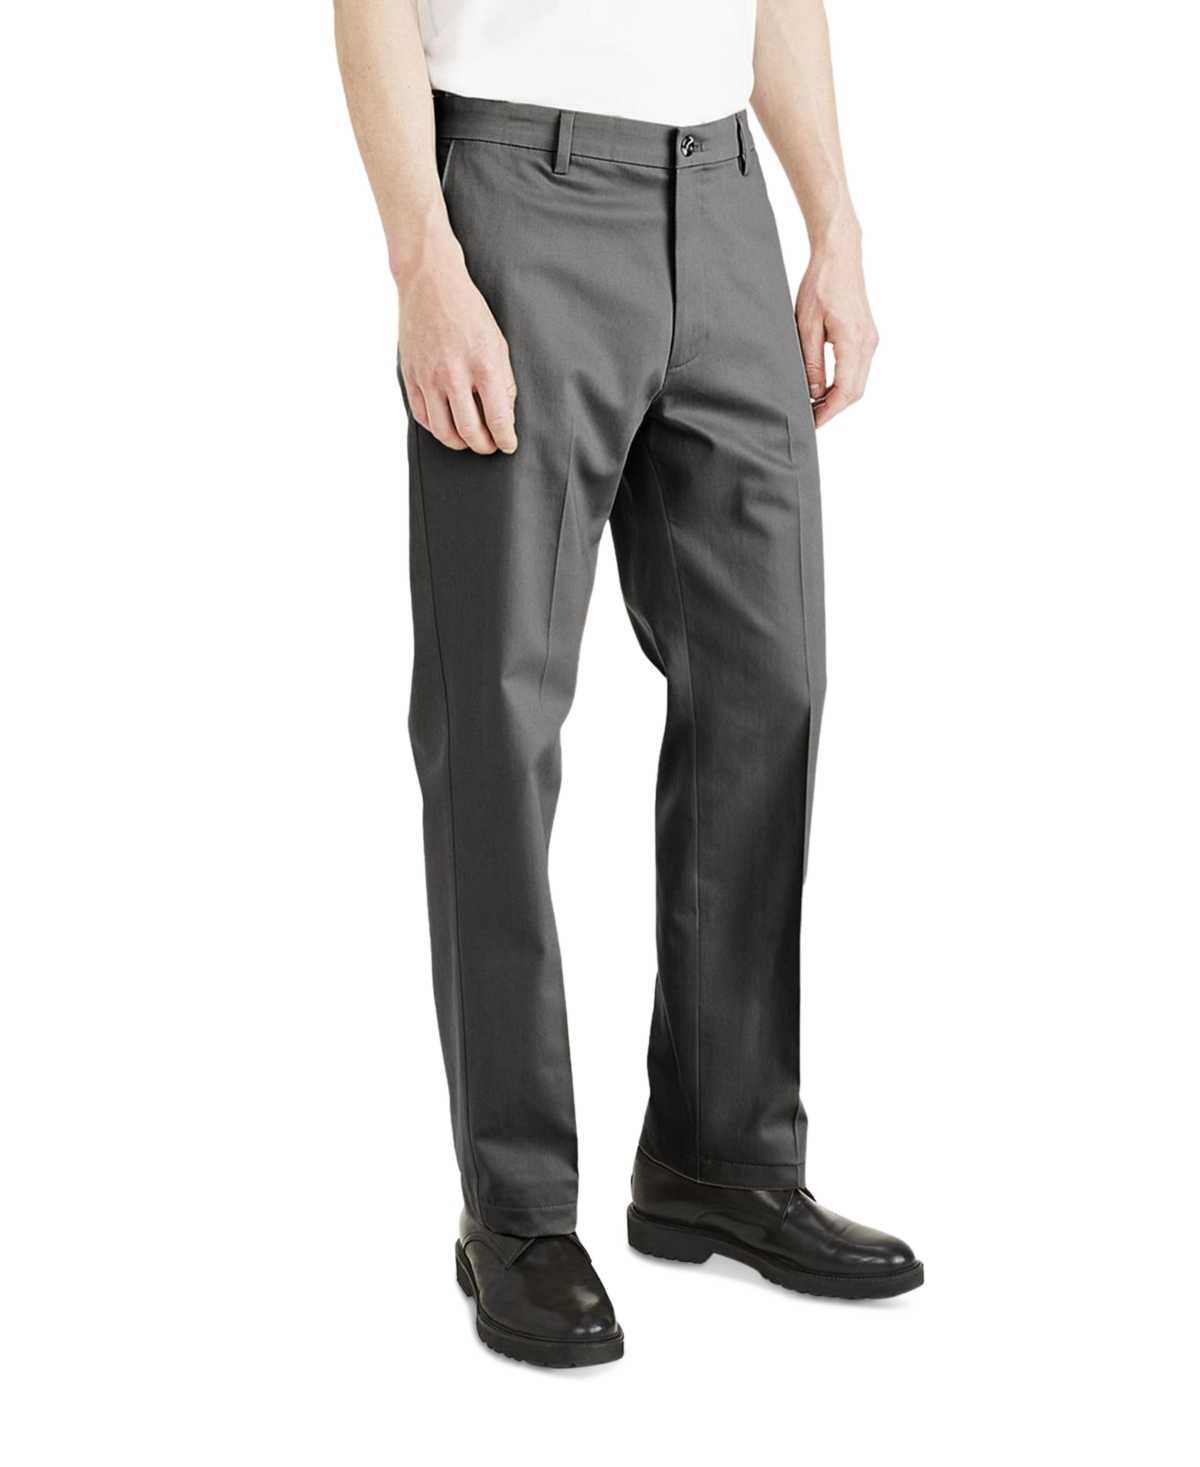 Dockers Men's Big & Tall Signature Straight Fit Iron Free Khaki Pants With Stain Defender In Steelhead